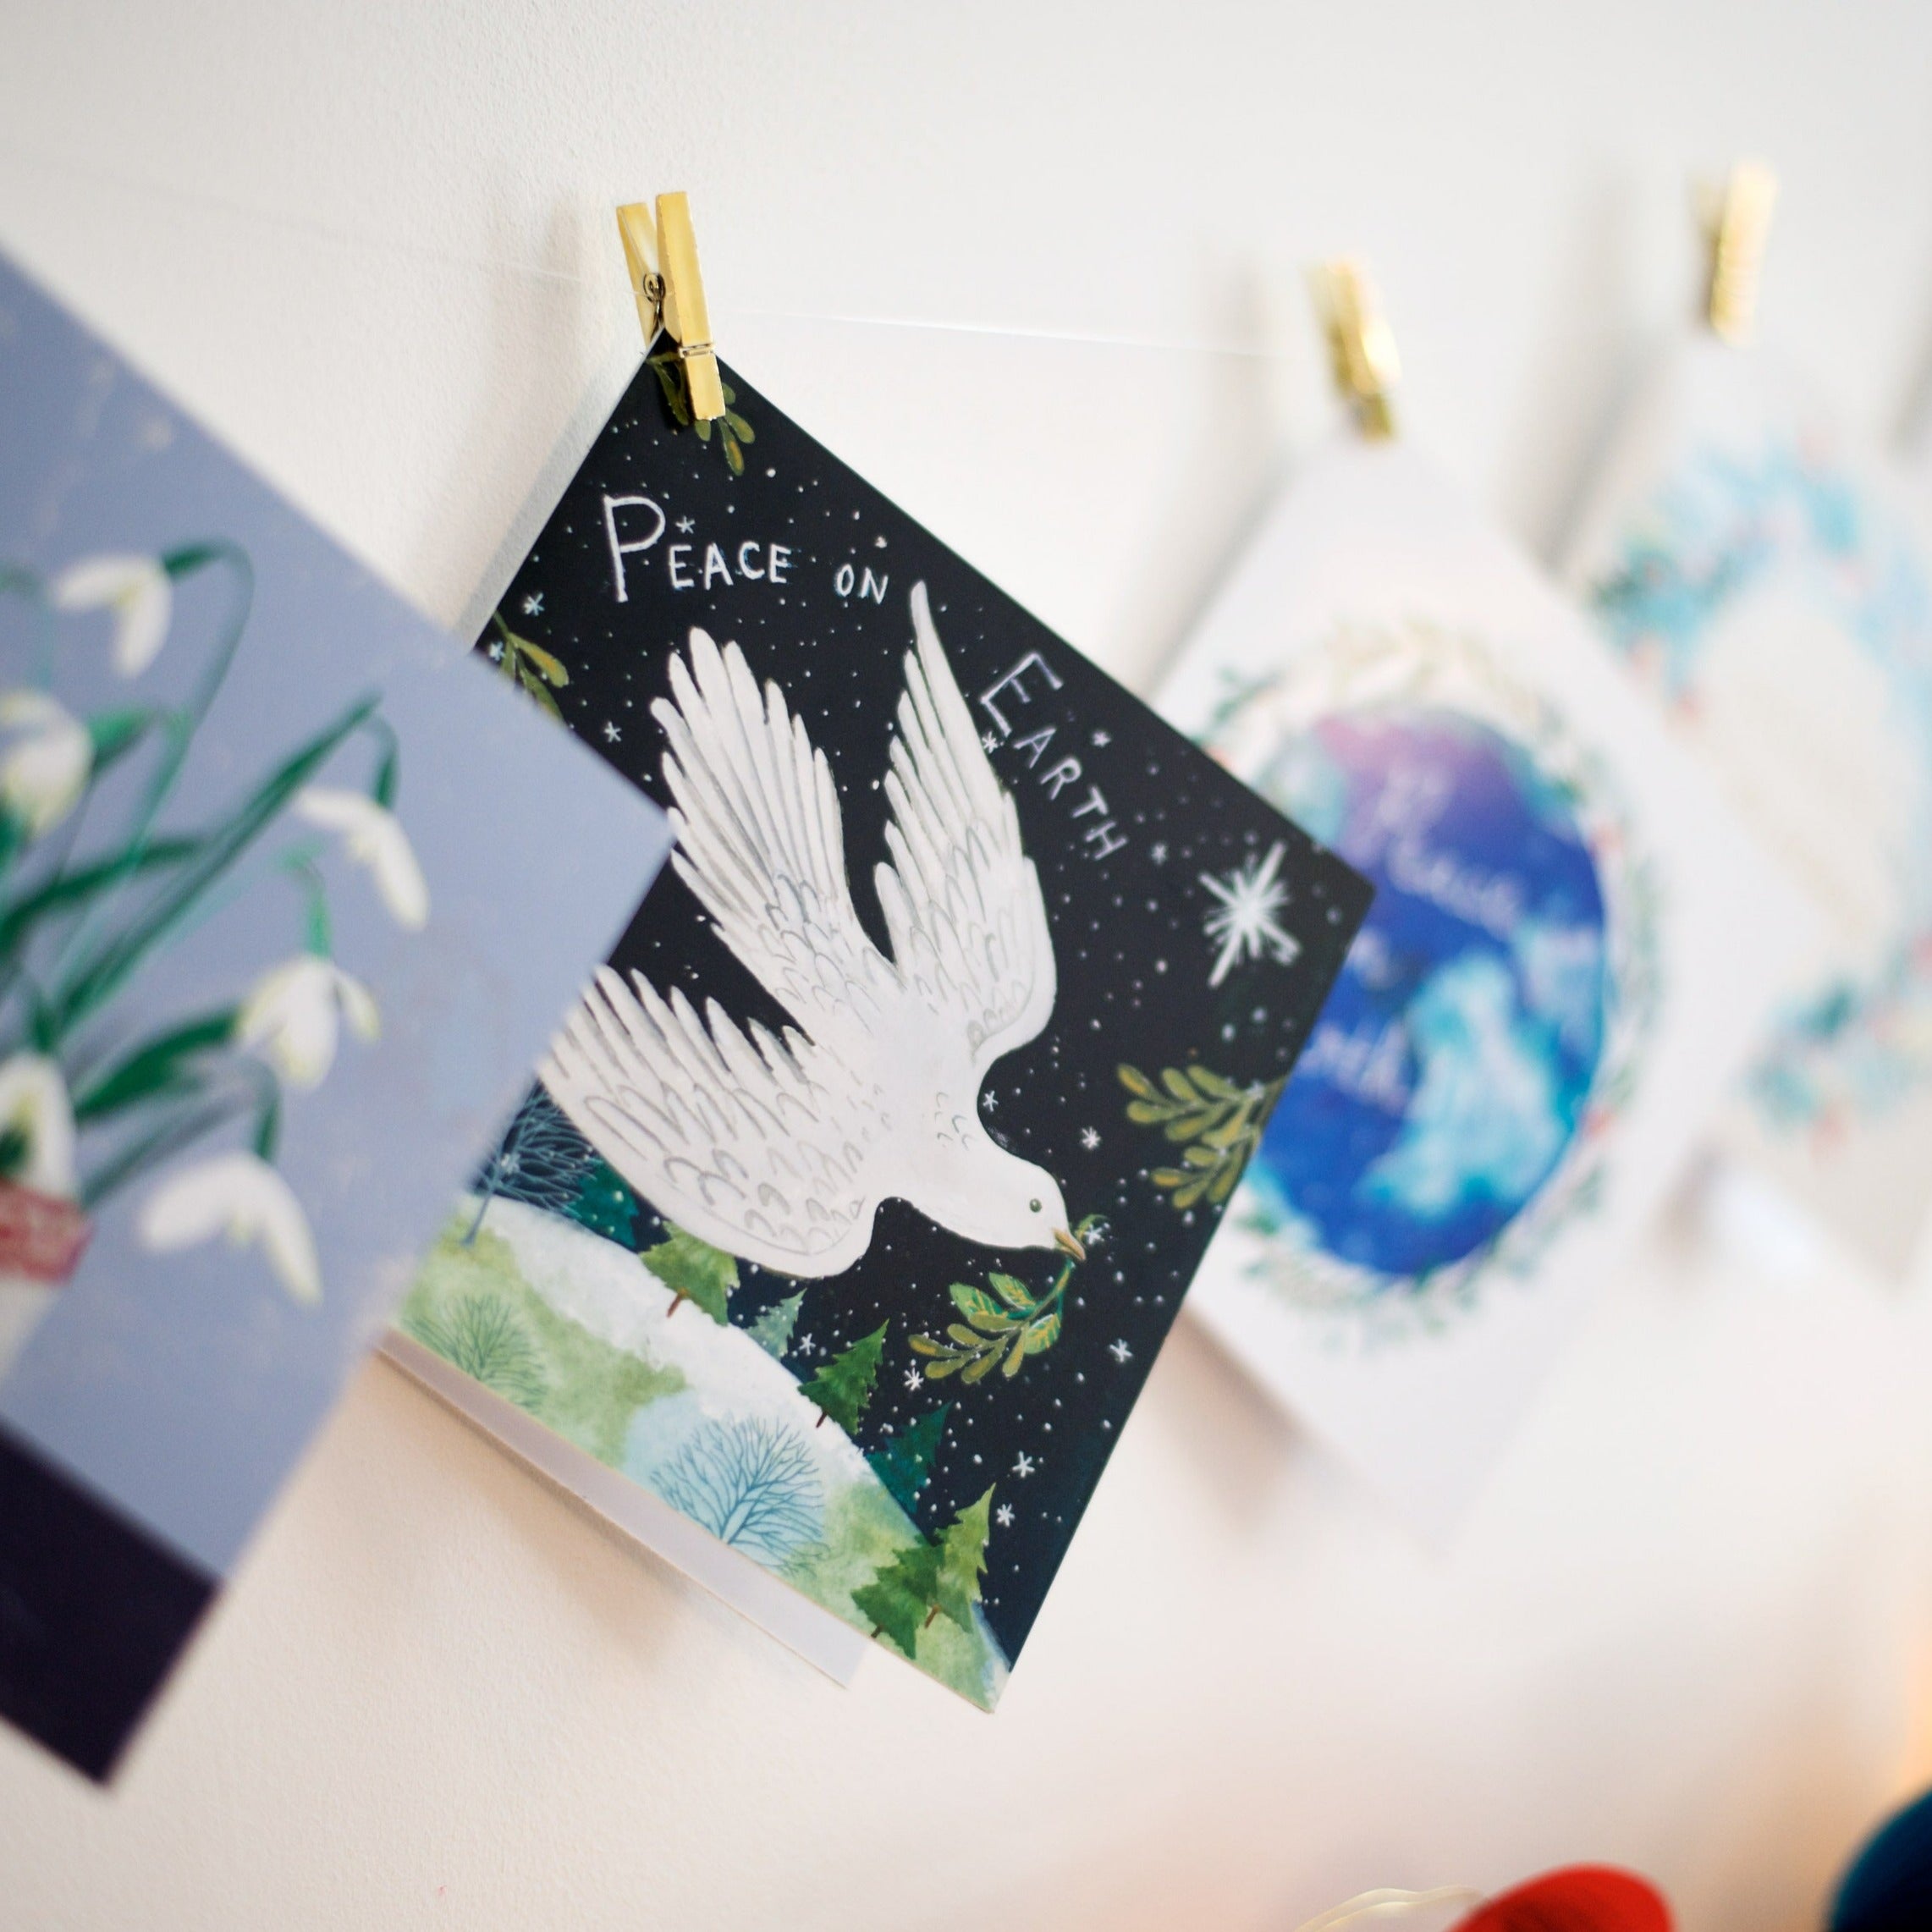 Peace on Earth Dove - Pack of 10 Charity Christmas Cards With Envelopes